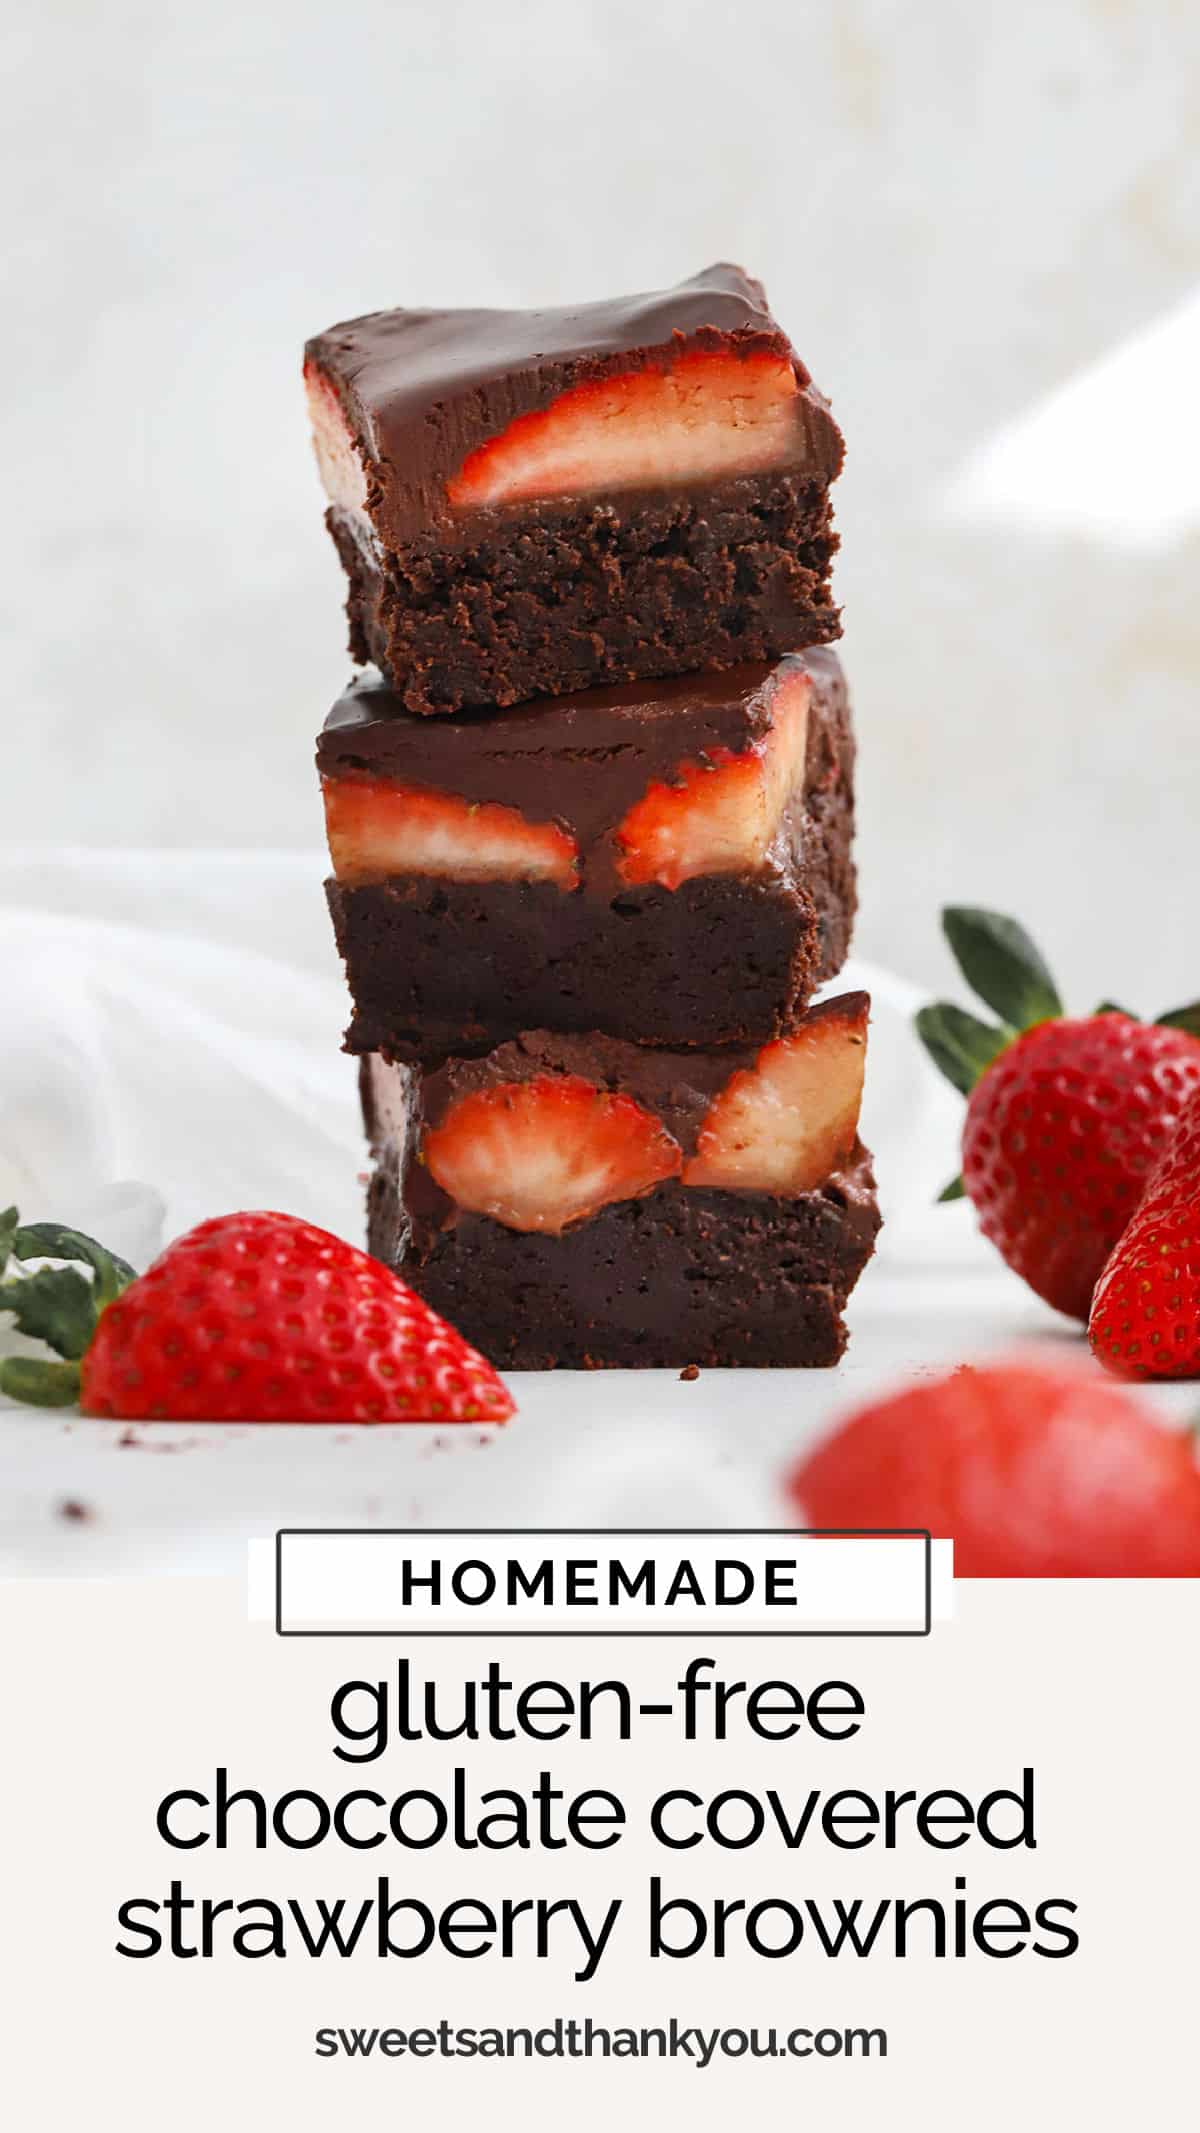 Gluten-Free Chocolate Covered Strawberry Brownies - Fudgy gluten-free brownies are topped with fresh, ripe strawberries and a glorious chocolate ganache that'll make your heart sing! // gluten-free strawberry brownies // gluten-free valentine's brownies // gluten-free dessert // valentines dessert // strawberry brownie recipe // Sweets And Thank You brownie recipe / chocolate strawberry brownies / gluten free valentine's day dessert